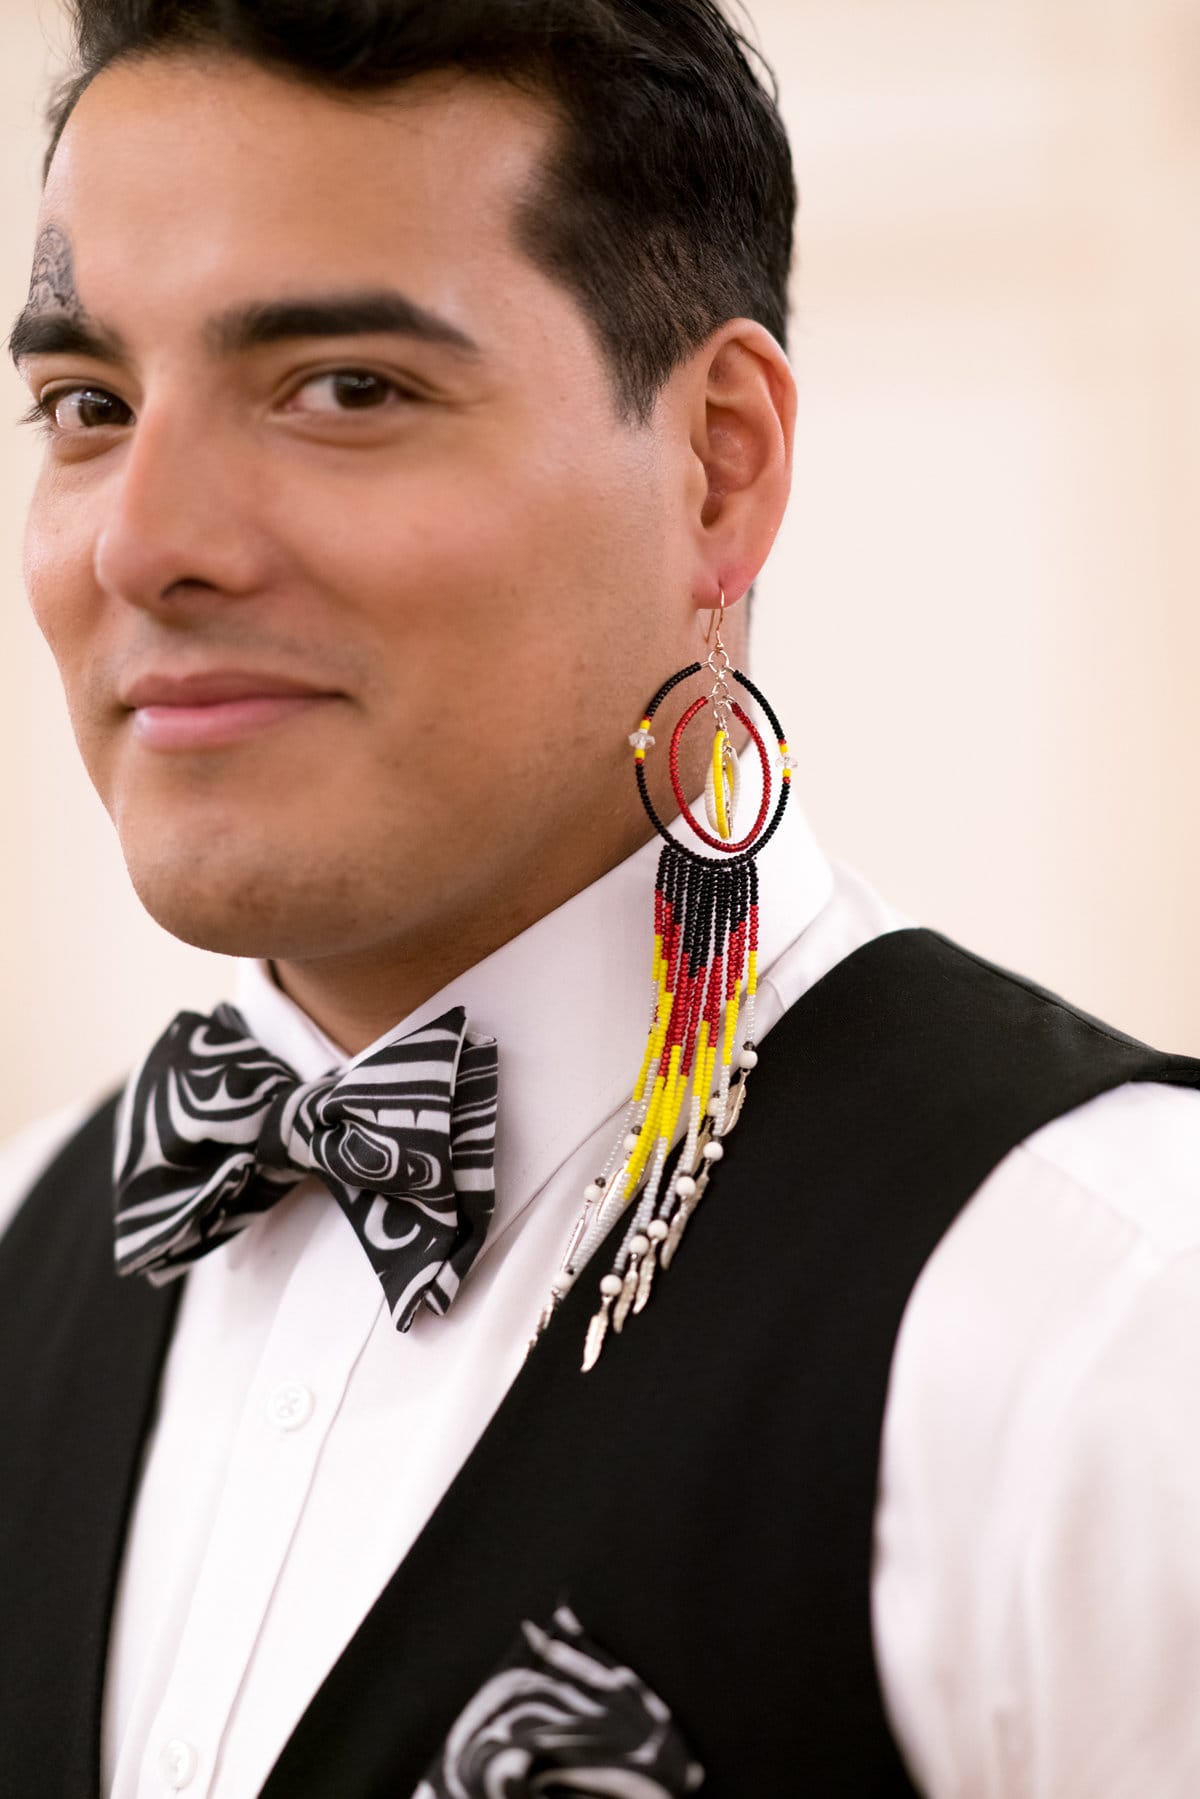 image description: the head and shoulders of a man in three-quarters profile; he is wearing a single beaded earring in his left ear, a bow tie in a black and white pattern associated with indigenous art, and he has a small tattoo of a similar pattern over his right eyebrow